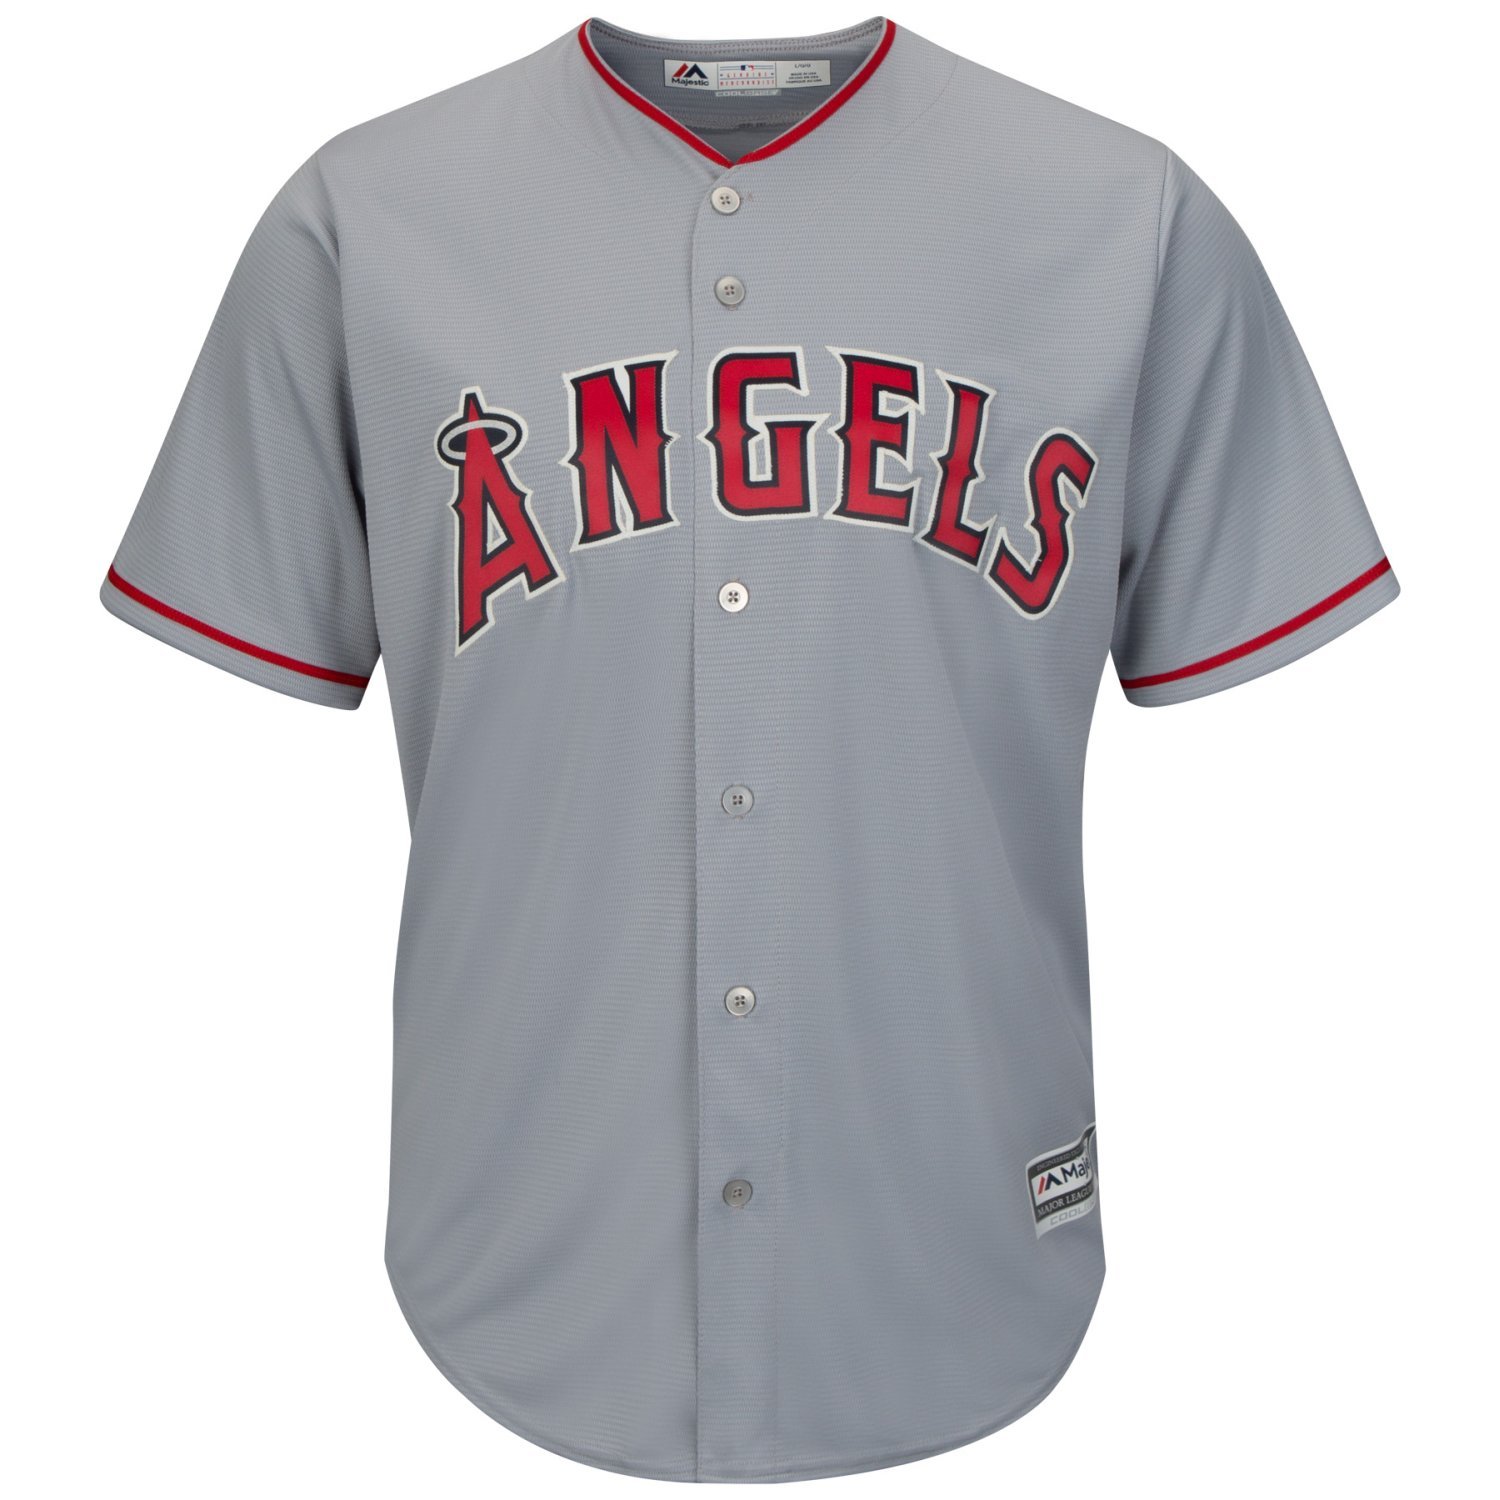 how do cool base jerseys fit